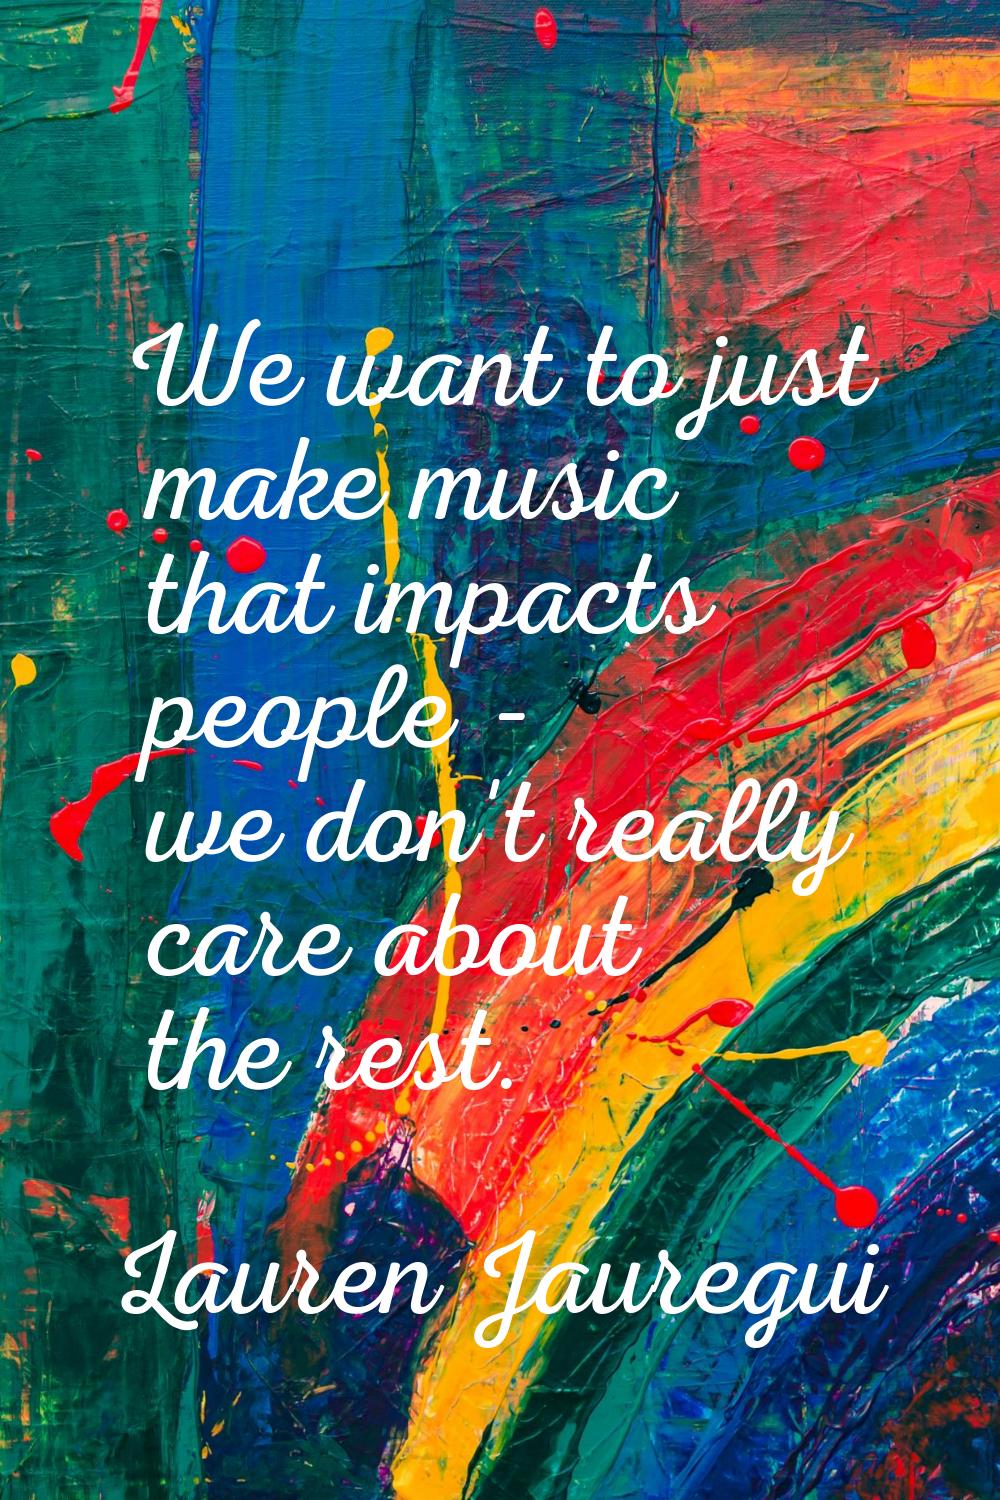 We want to just make music that impacts people - we don't really care about the rest.